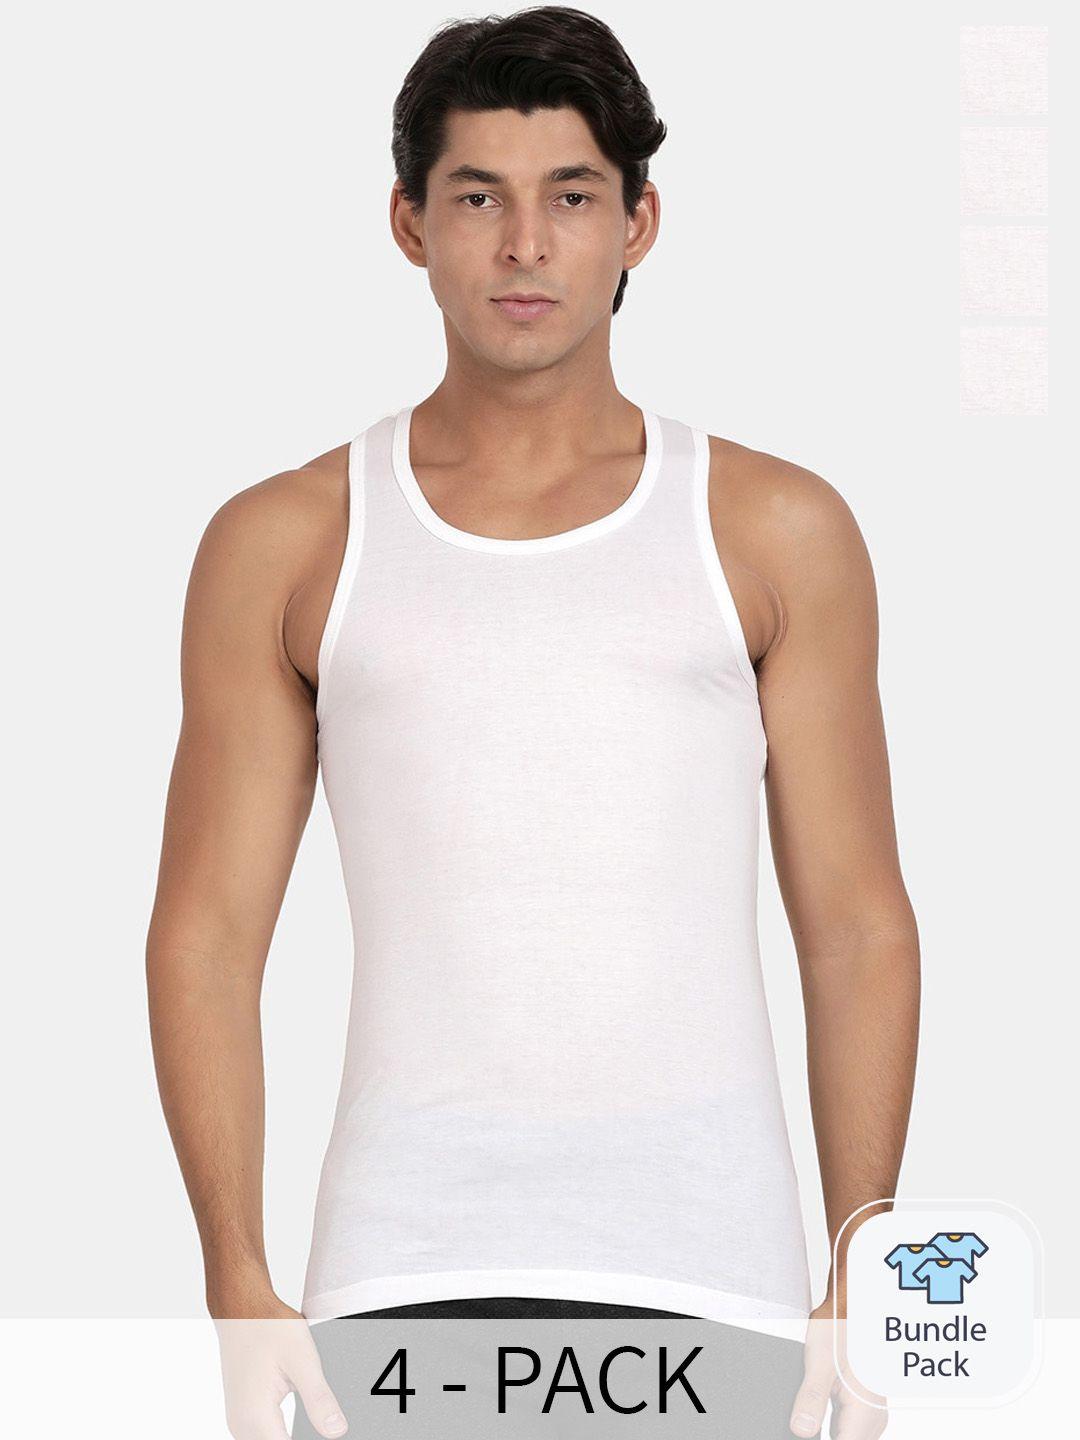 pepe jeans pack of 4 pure cotton sleeveless innerwear vests clv01-02-white4